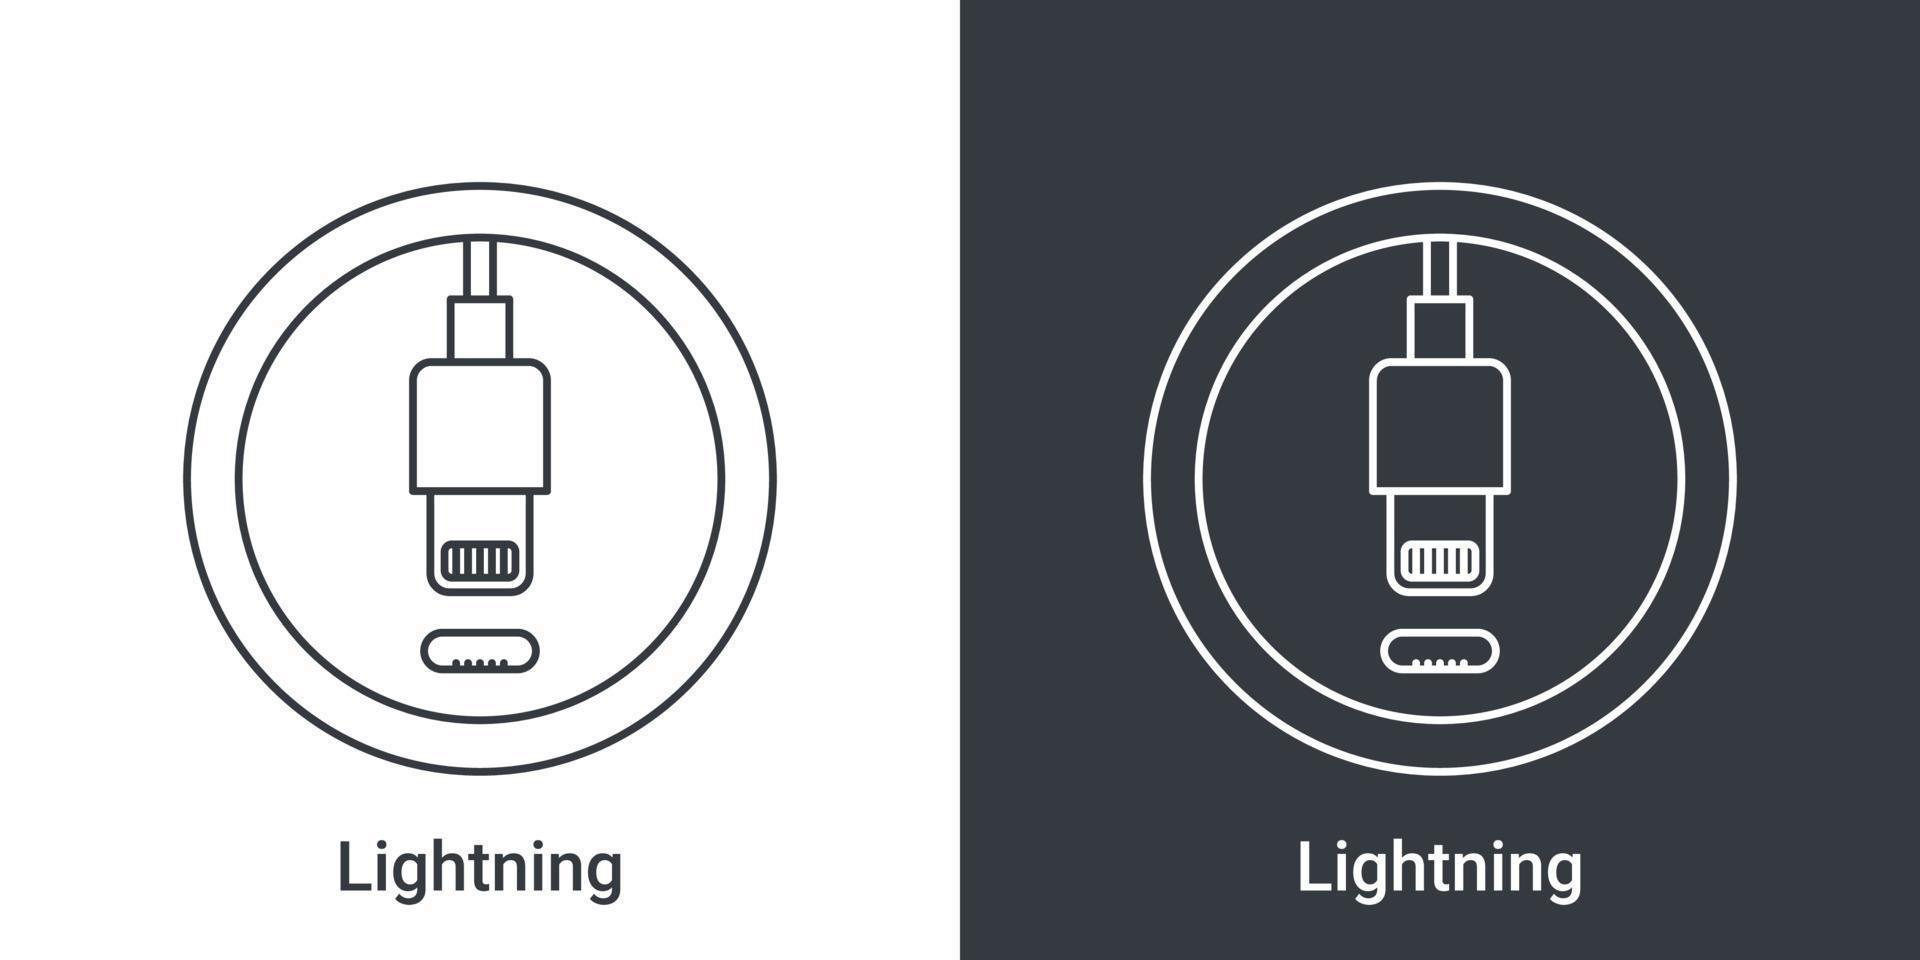 Lightning port icon. Socket sign of phone. Connectors icon. Vector illustration